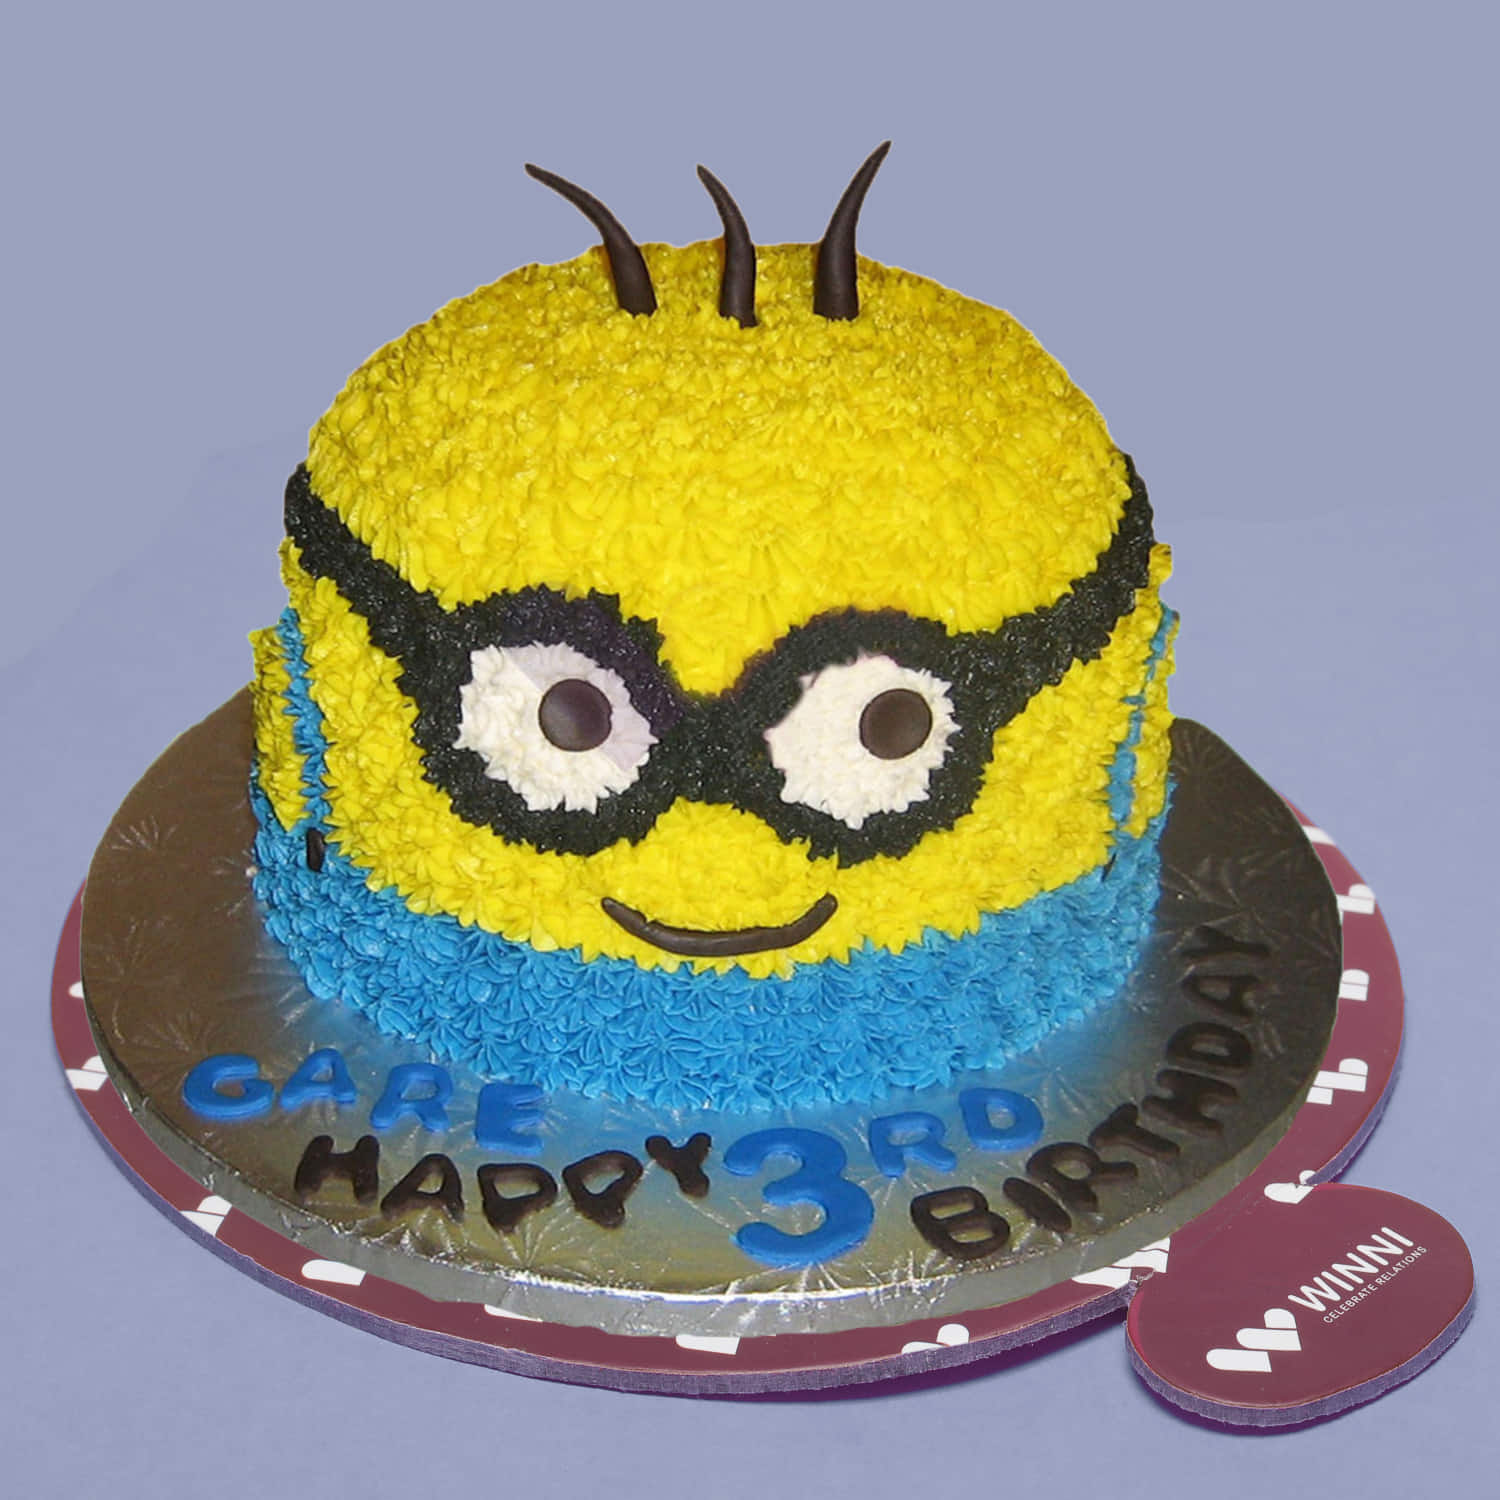 Minions Birthday Cake Ideas Images (Pictures)